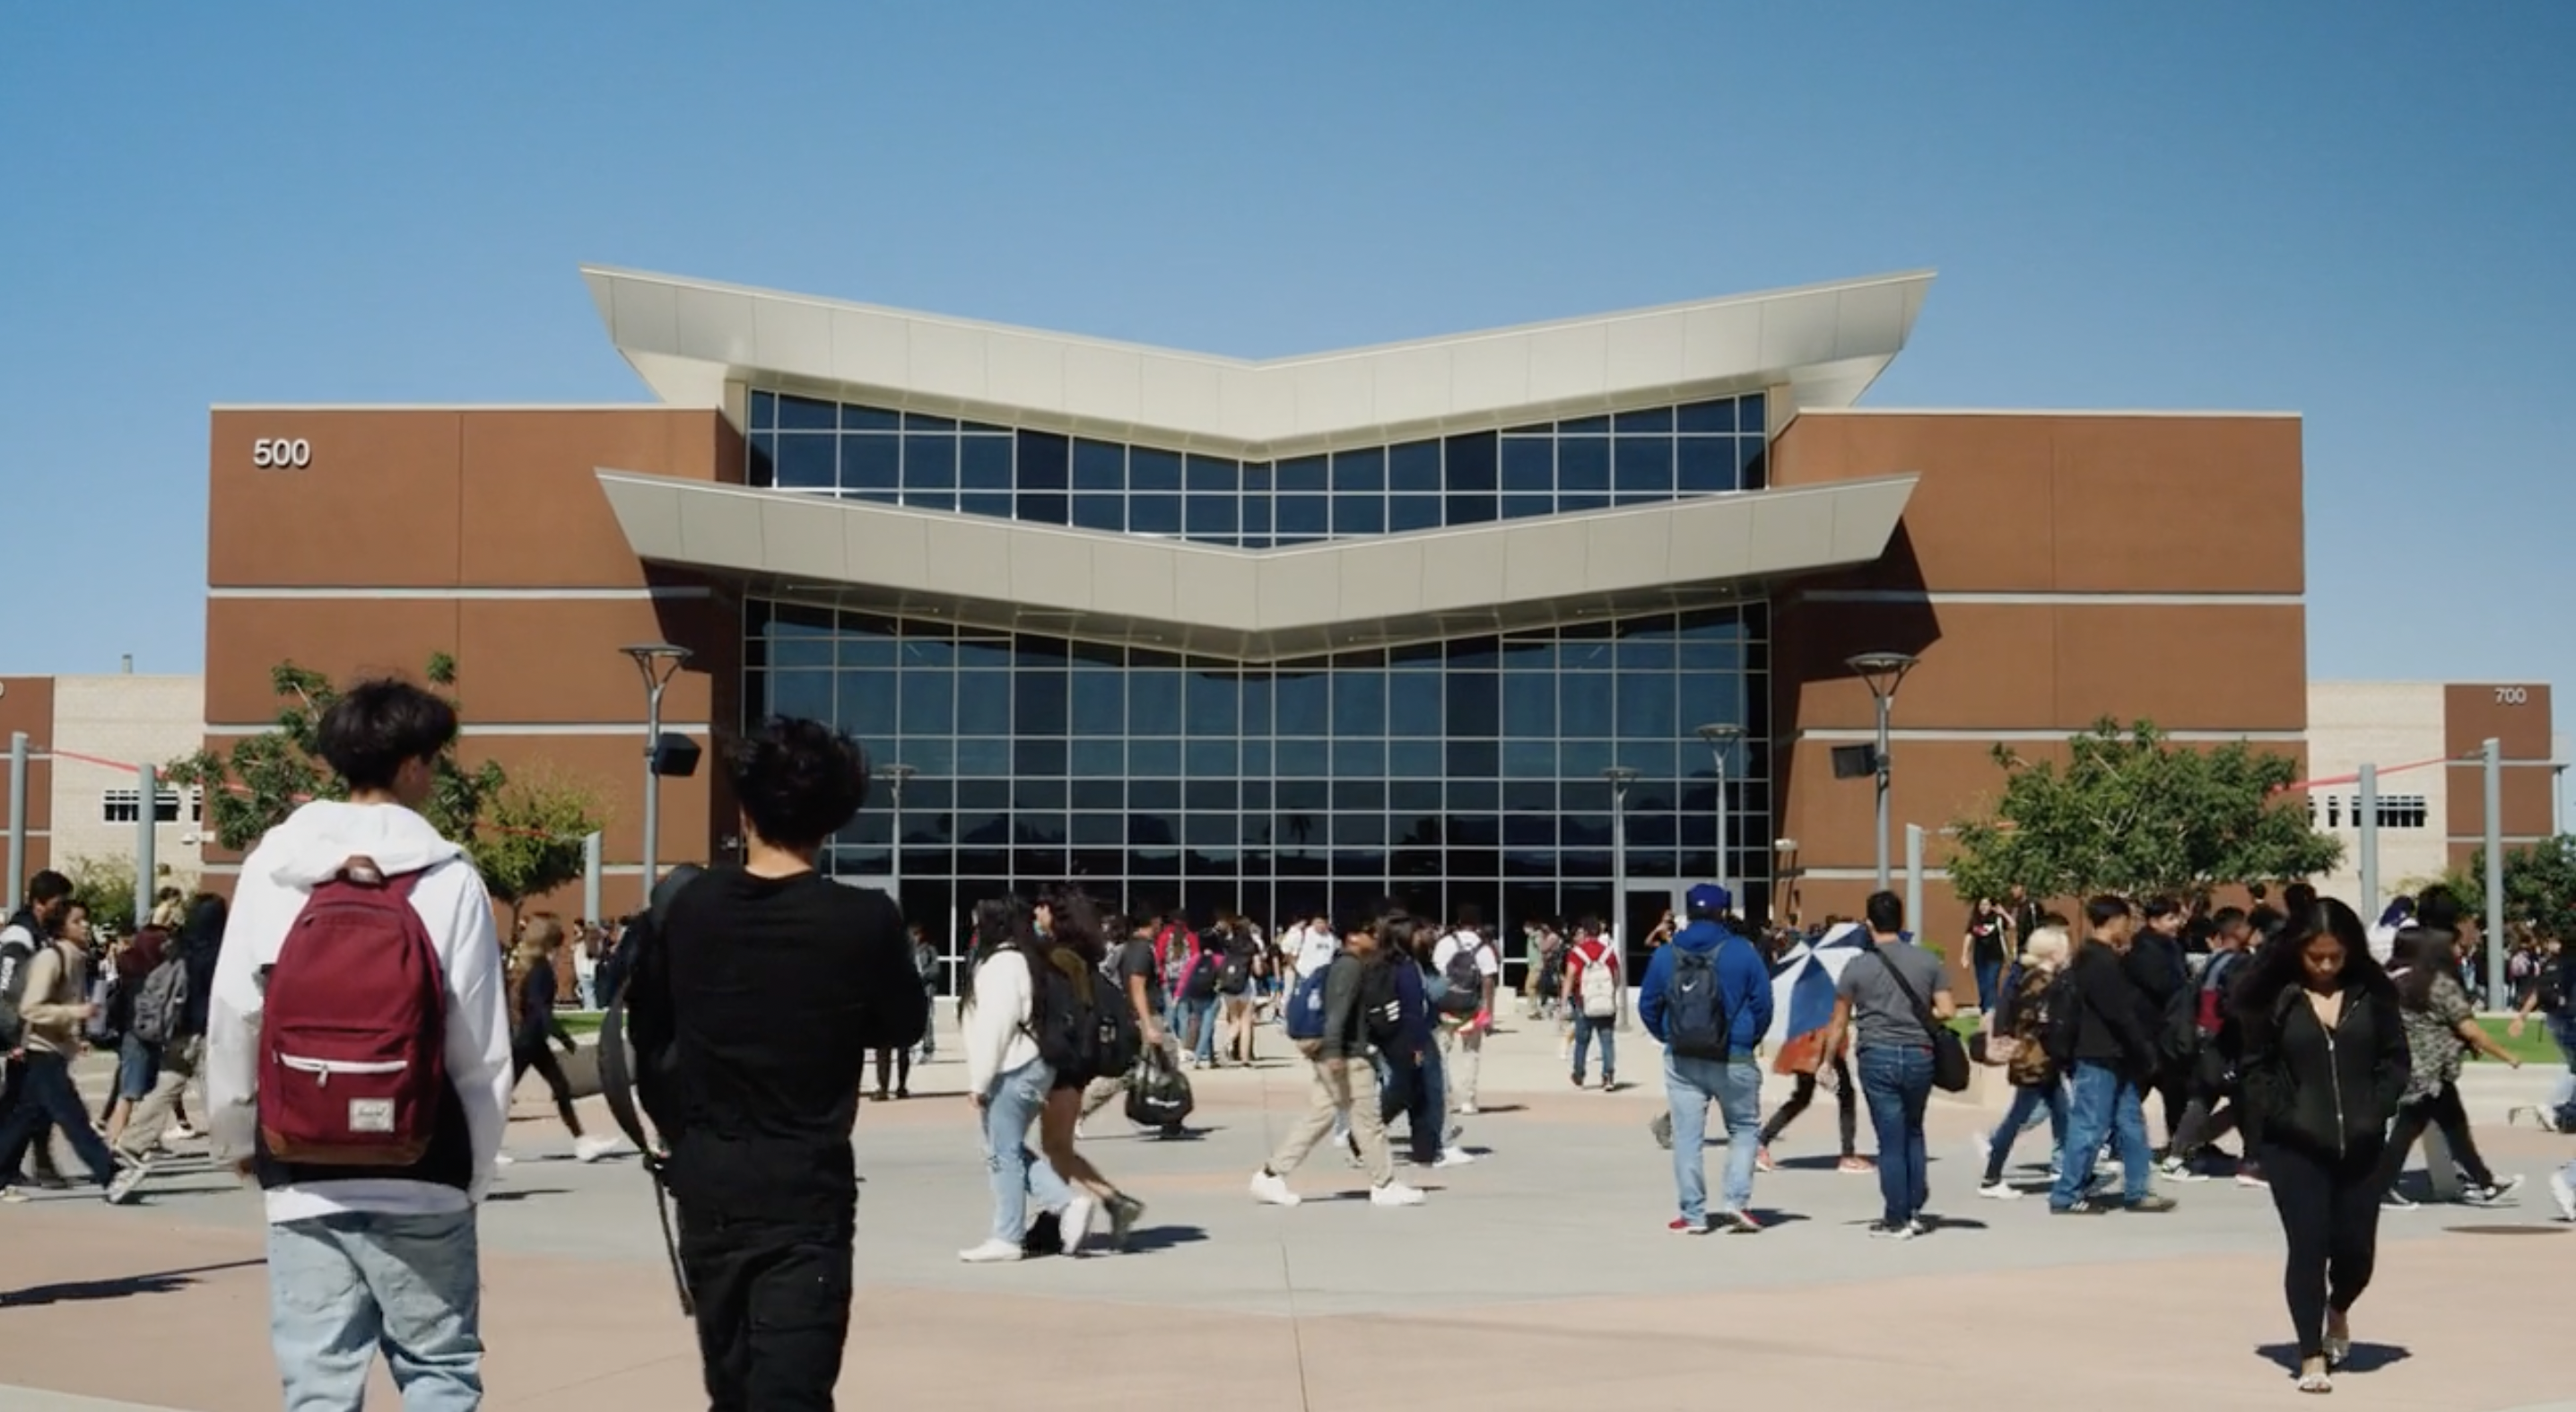 Tolleson Union High School District